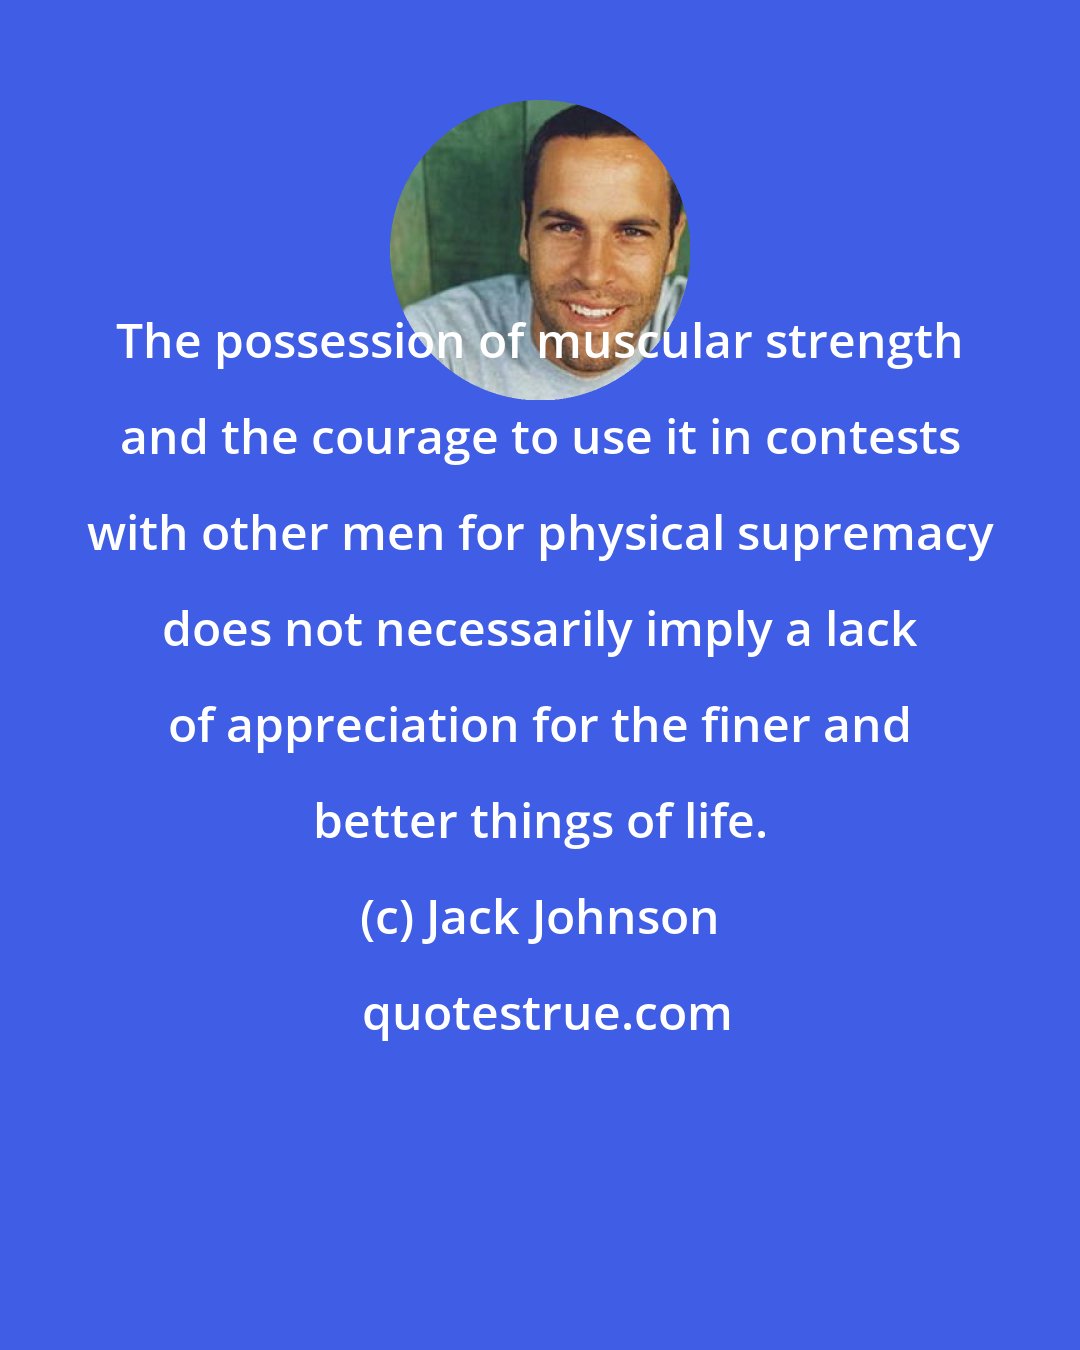 Jack Johnson: The possession of muscular strength and the courage to use it in contests with other men for physical supremacy does not necessarily imply a lack of appreciation for the finer and better things of life.